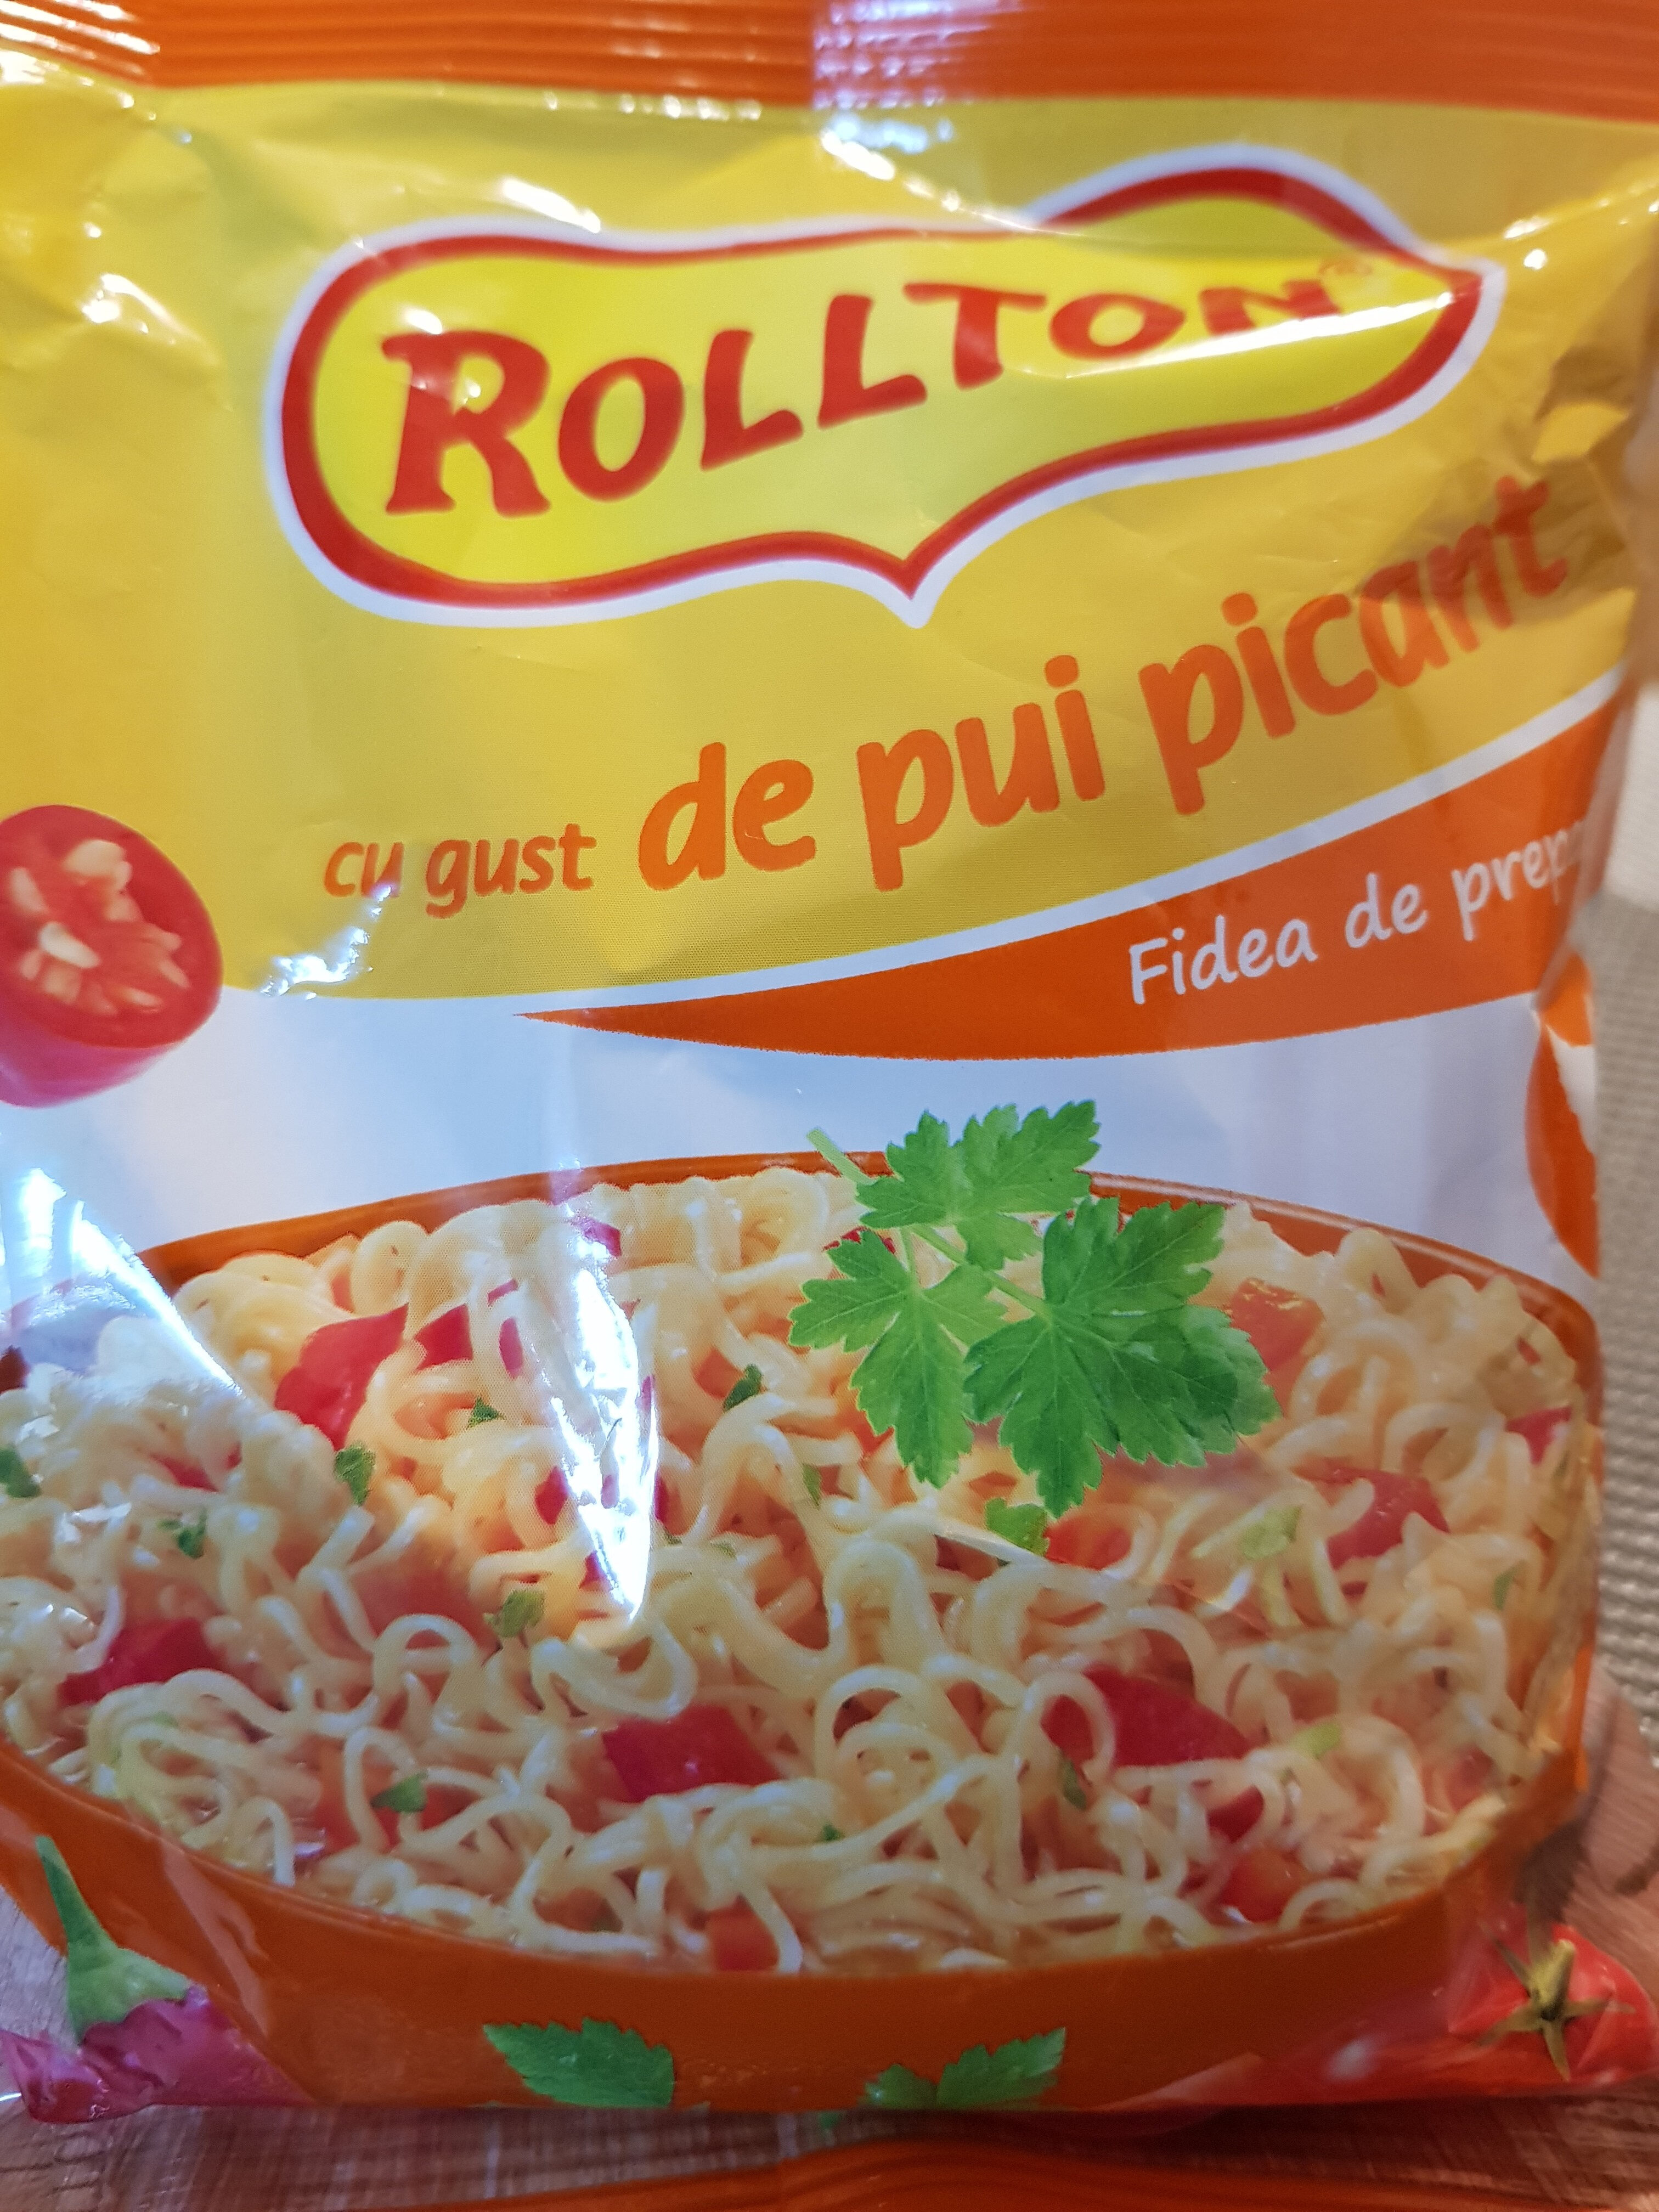 Rollton cu gust de pui picant - Nutrition facts - ro